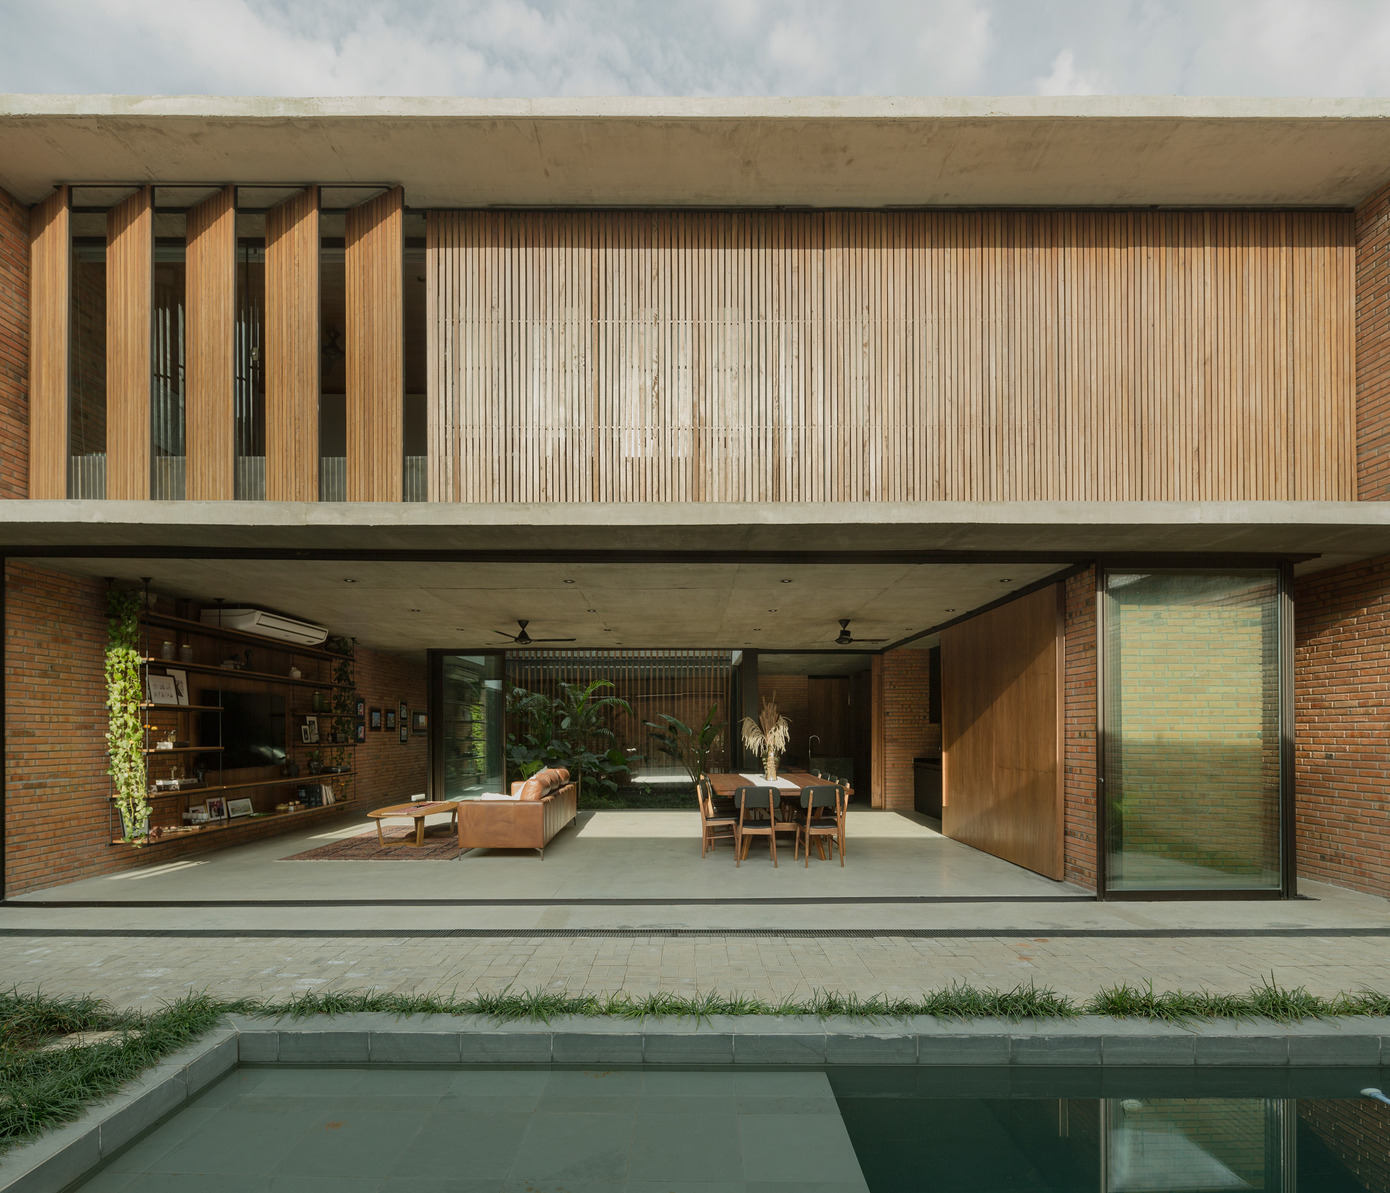 ME House: Innovating with Natural Materials